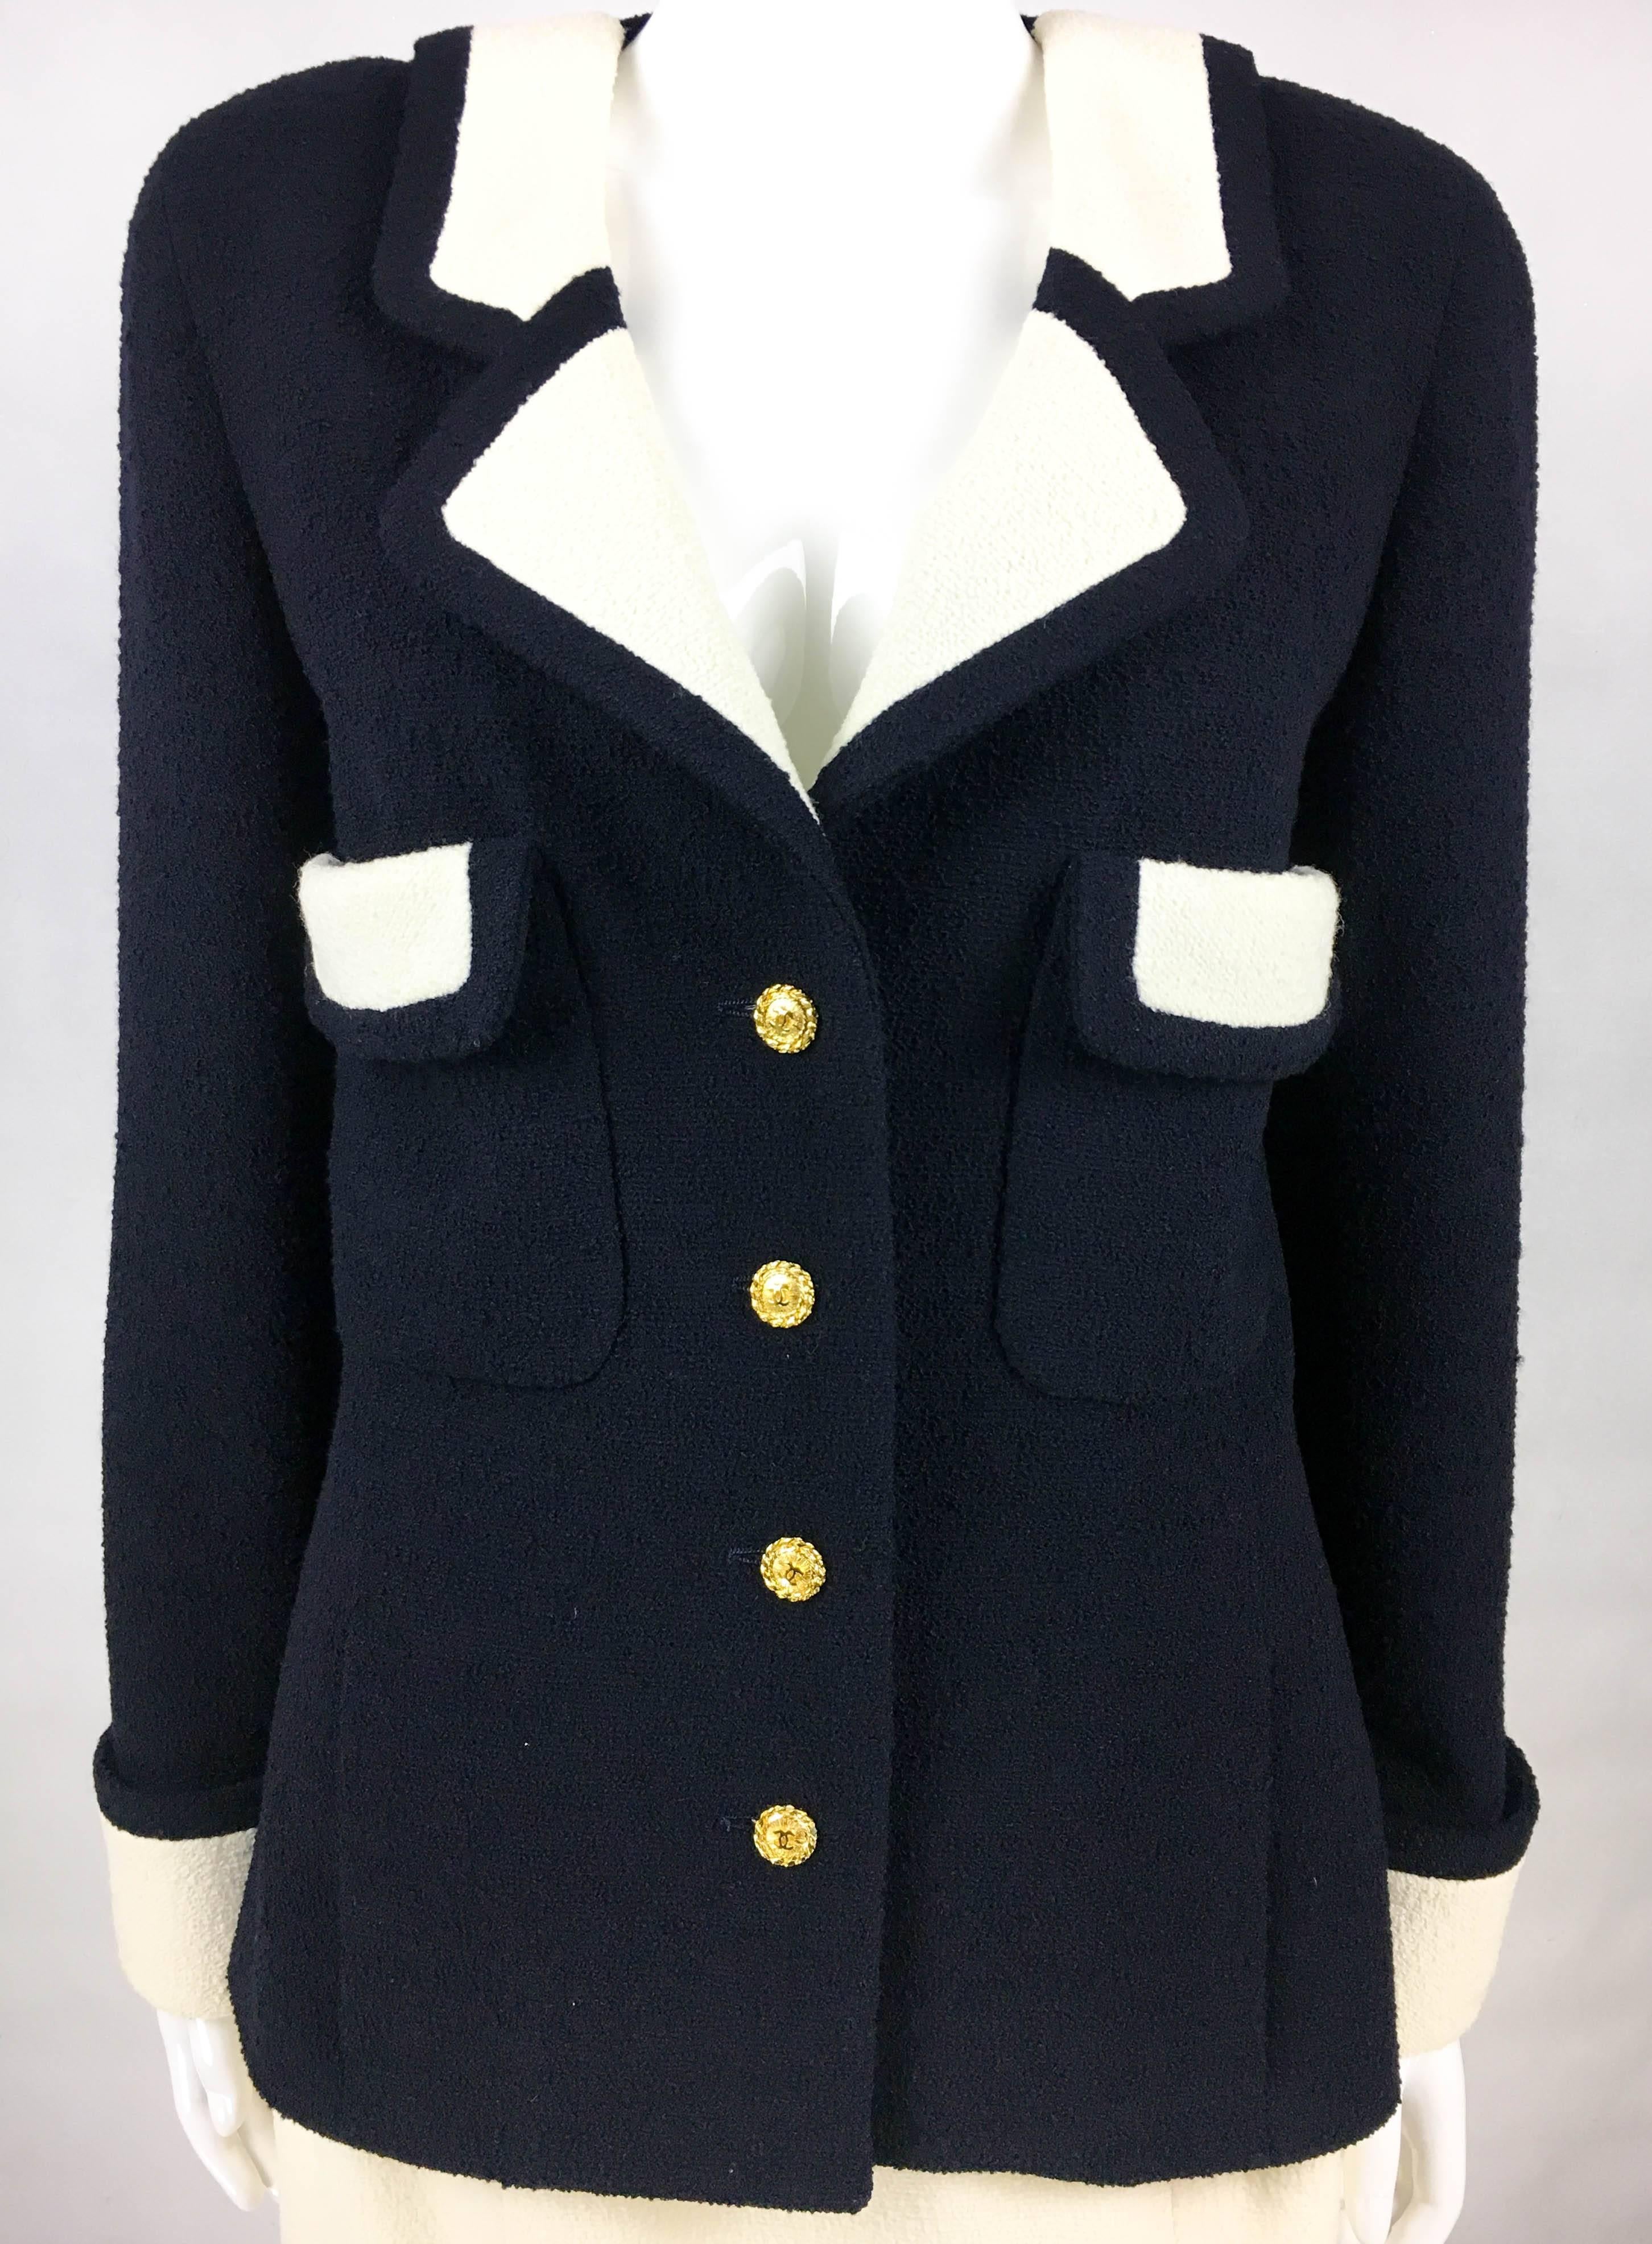 Chanel Nautical Inspired Navy and White Wool Skirt Suit, Circa 1982 In Excellent Condition In London, Chelsea